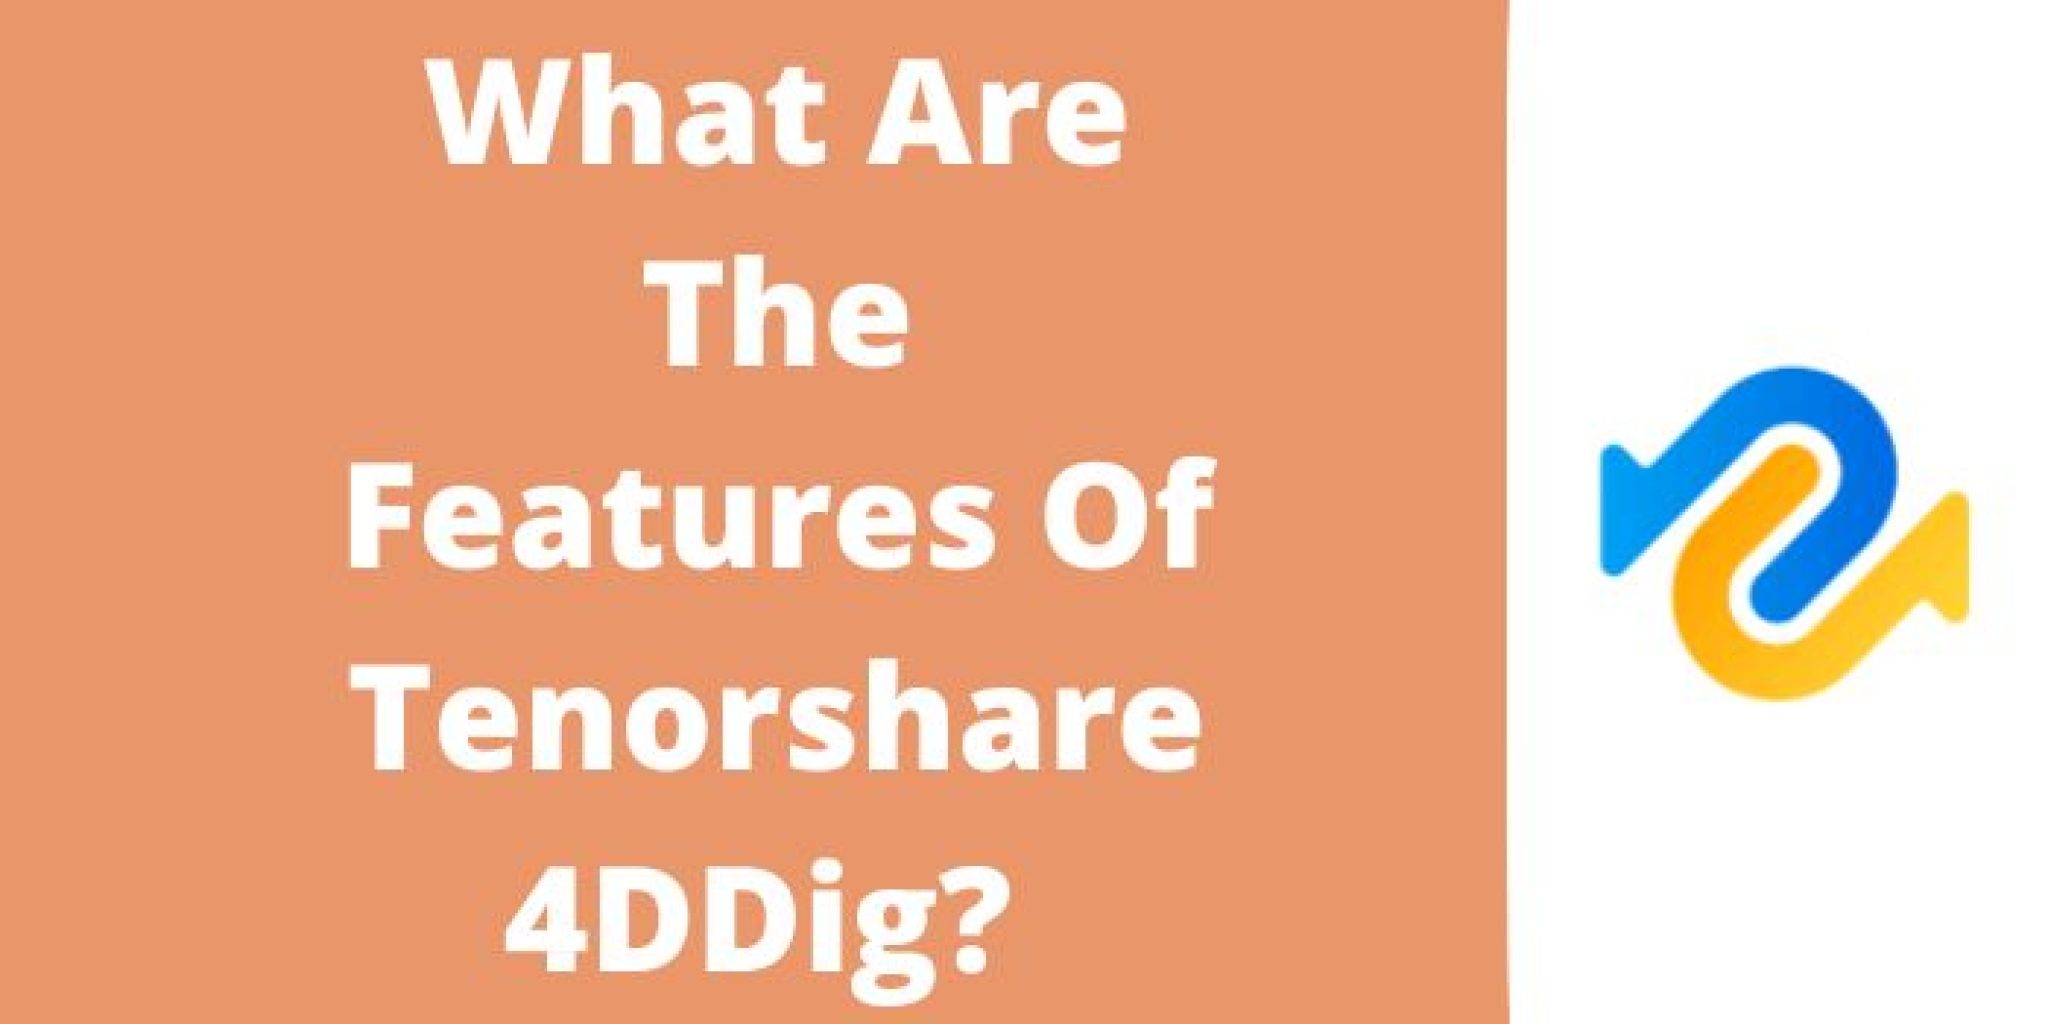 tenorshare 4ddig free download